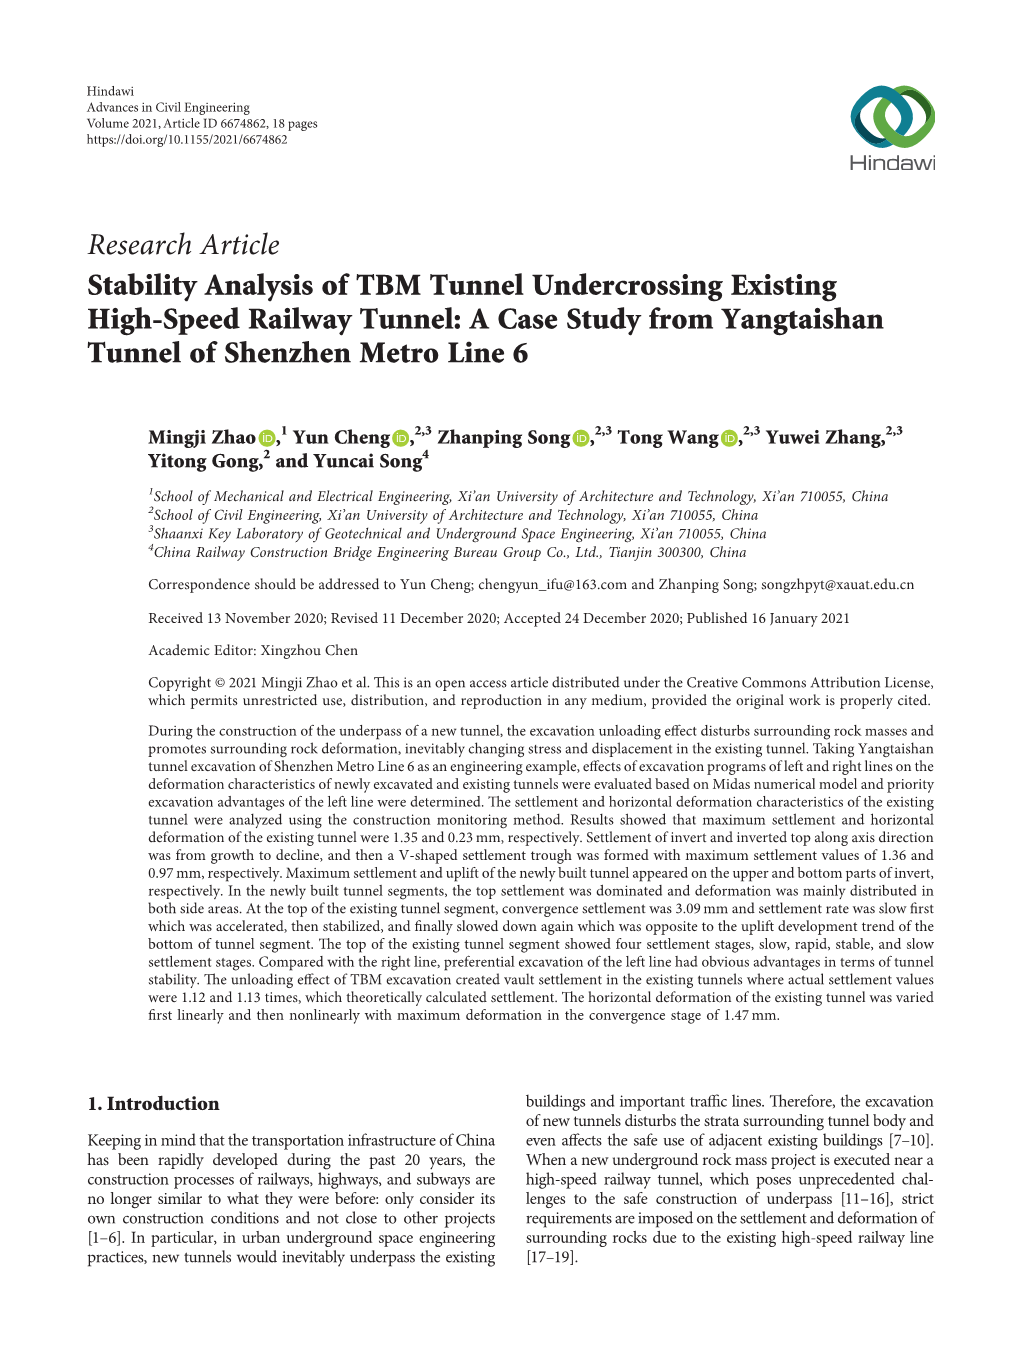 Stability Analysis of TBM Tunnel Undercrossing Existing High-Speed Railway Tunnel: a Case Study from Yangtaishan Tunnel of Shenzhen Metro Line 6